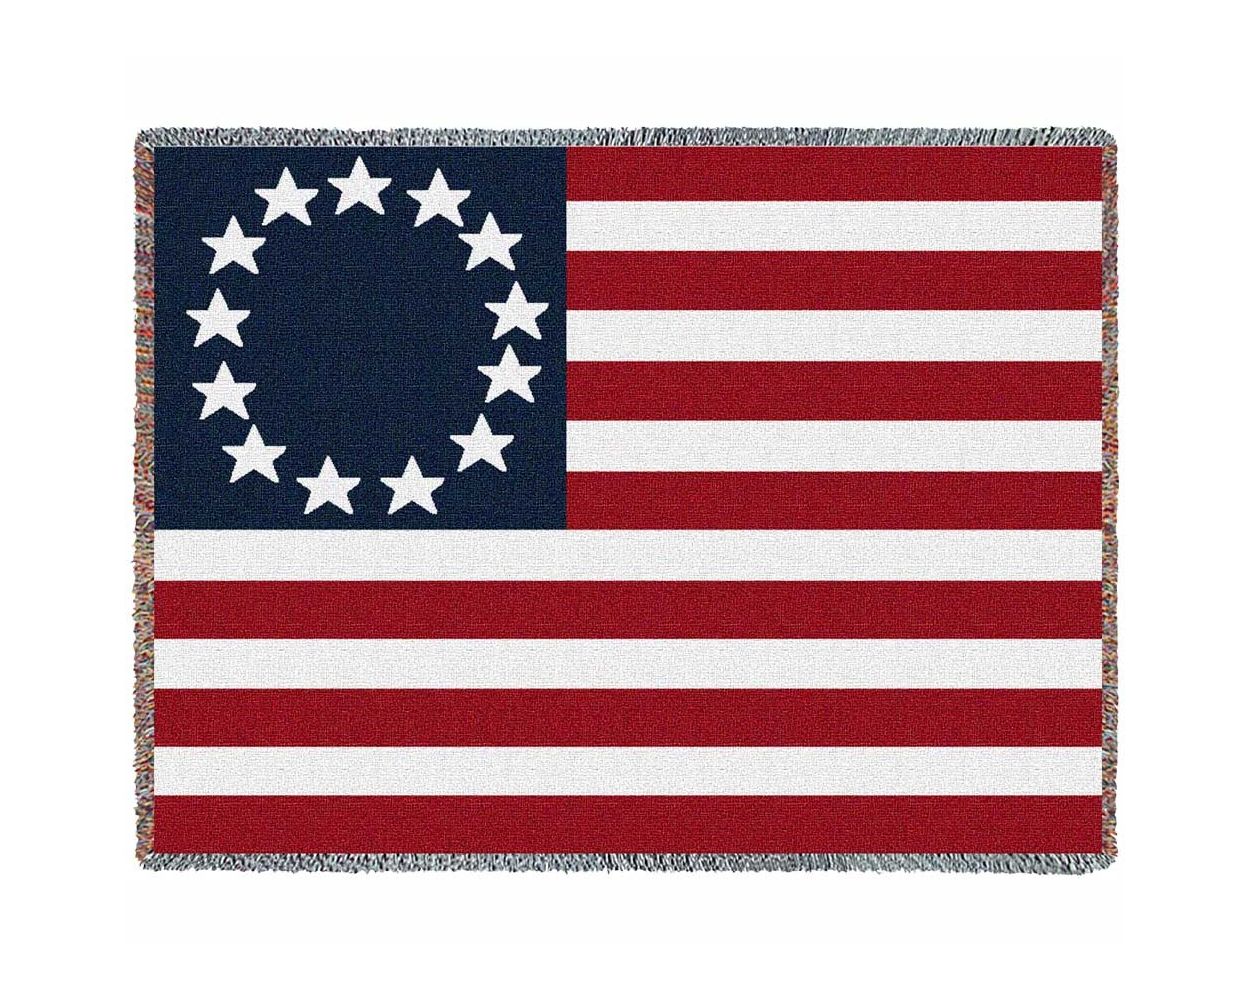 Betsy Ross Woven Cotton Throw Blanket (100% Cotton)